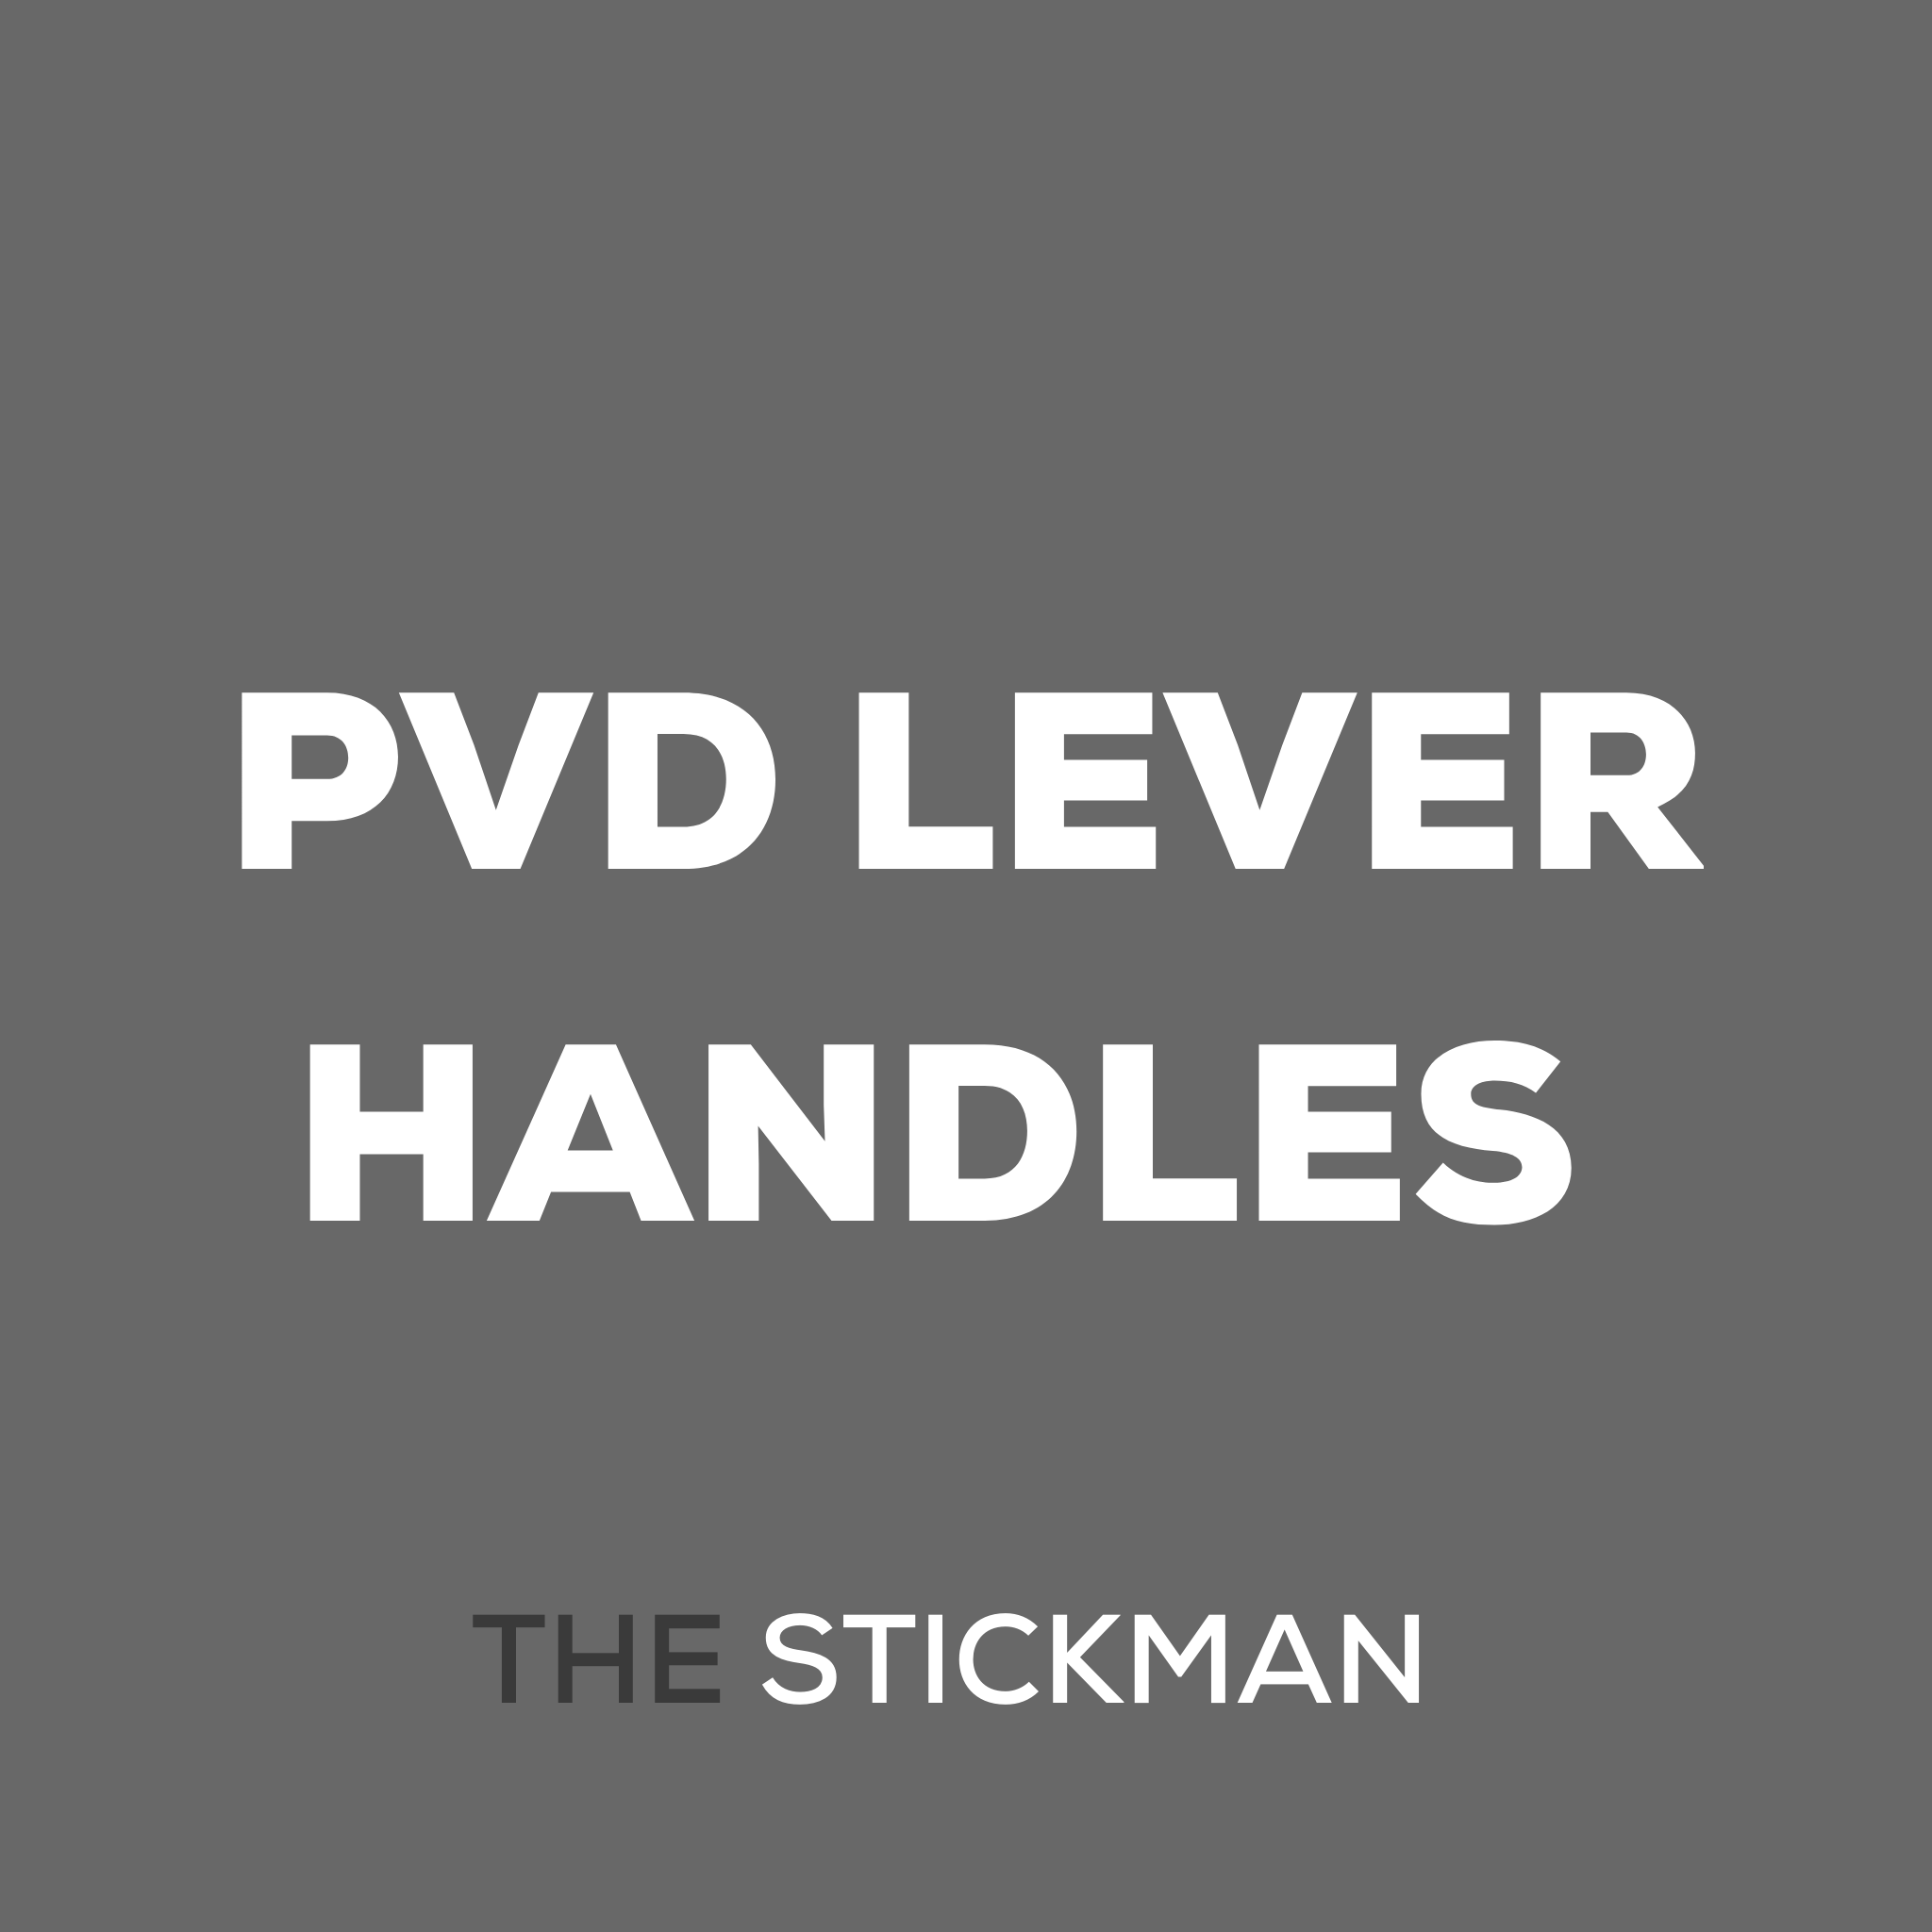 PVD Lever Handles